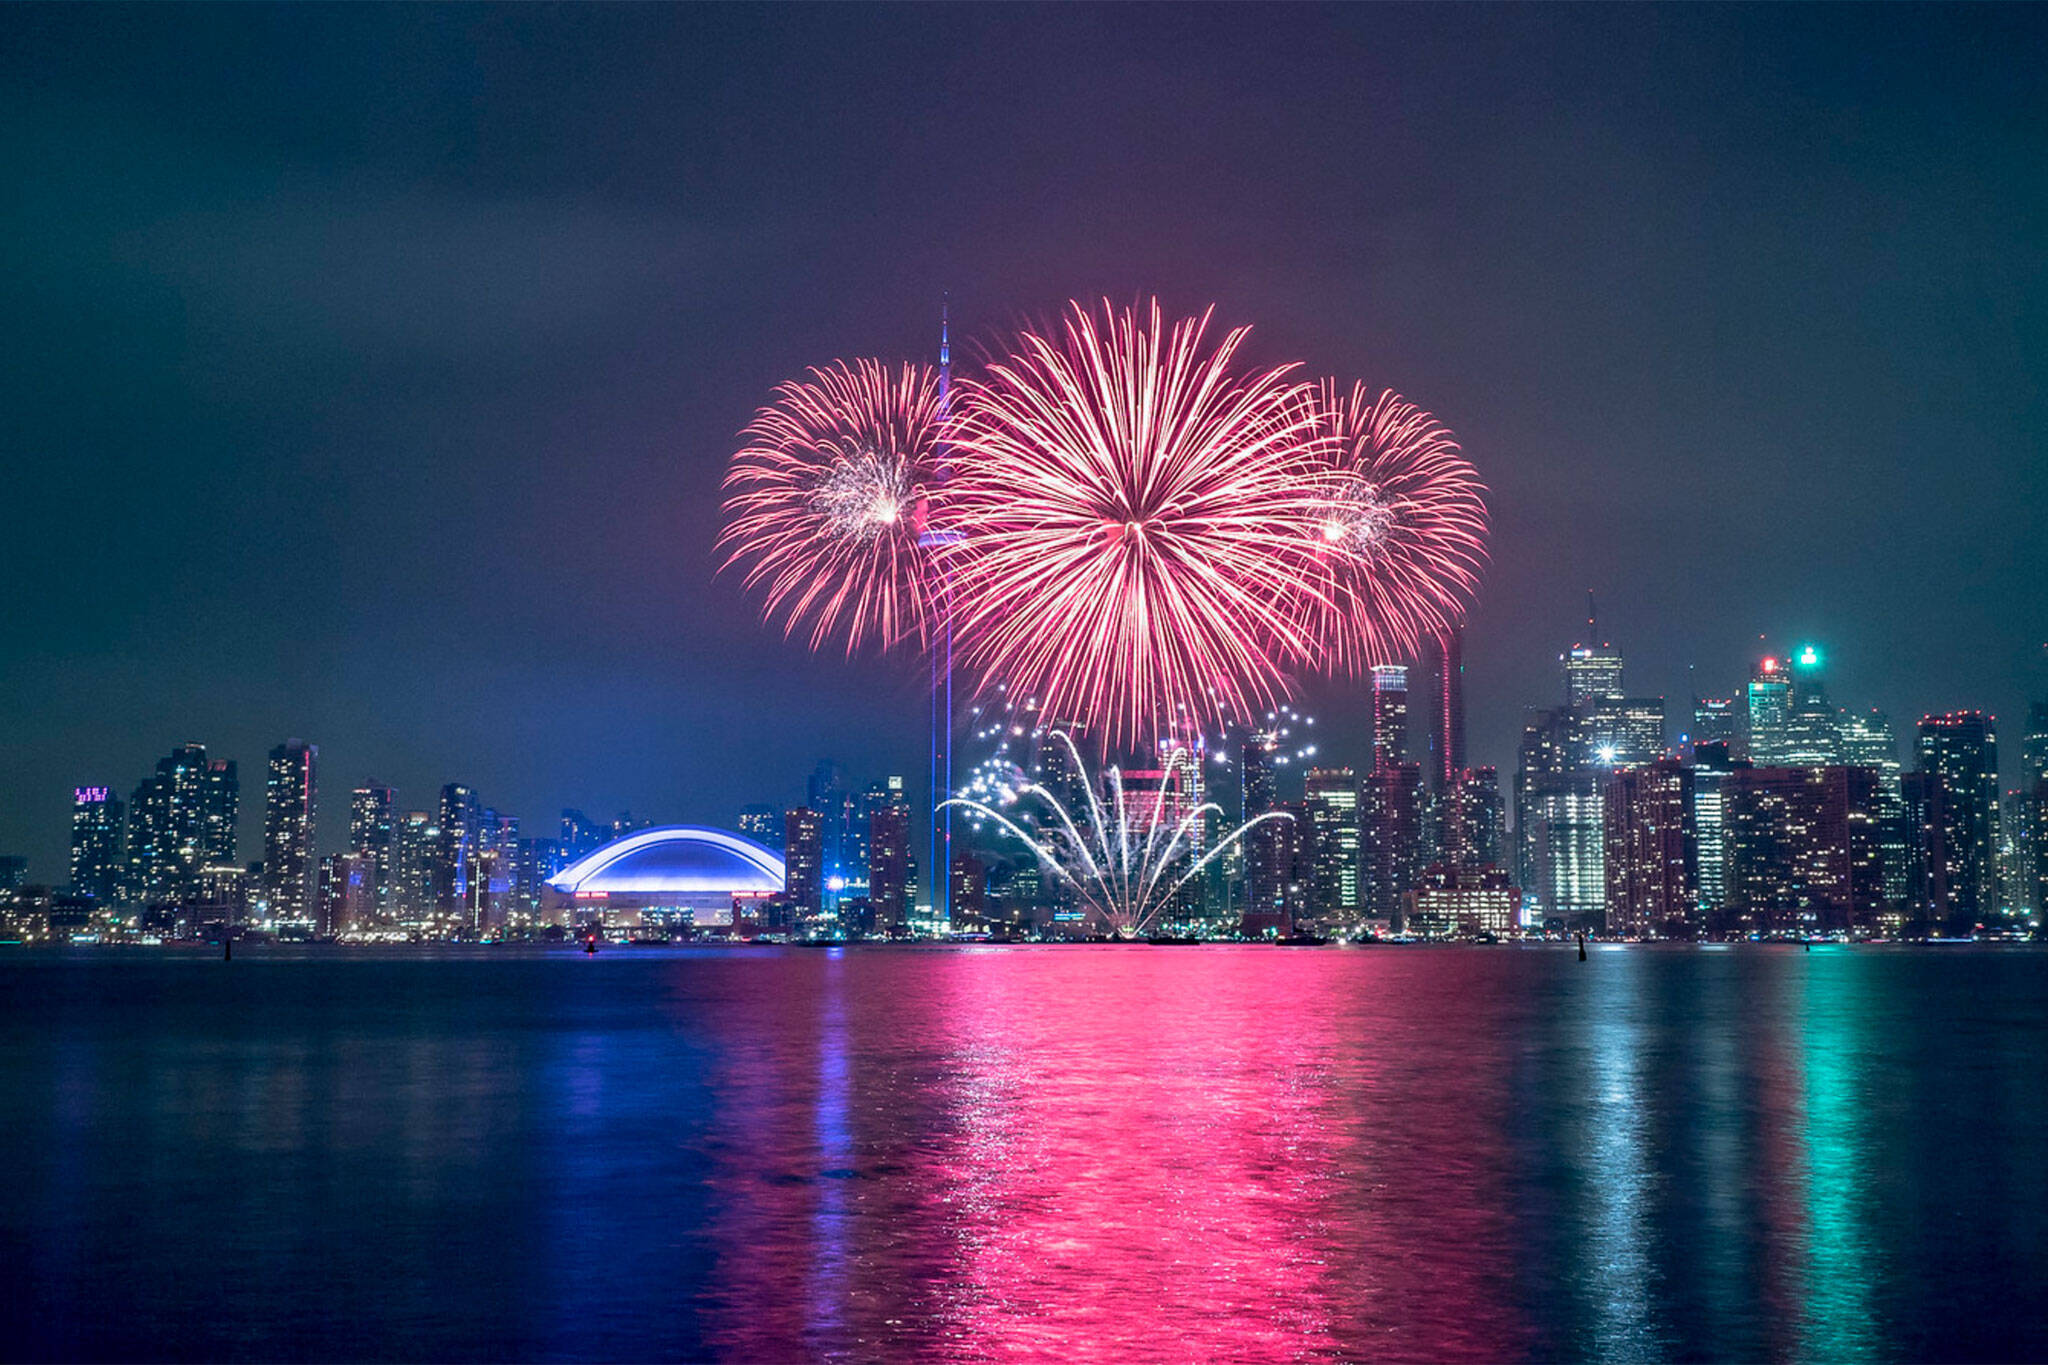 Toronto is getting a massive fireworks show for New Year's Eve